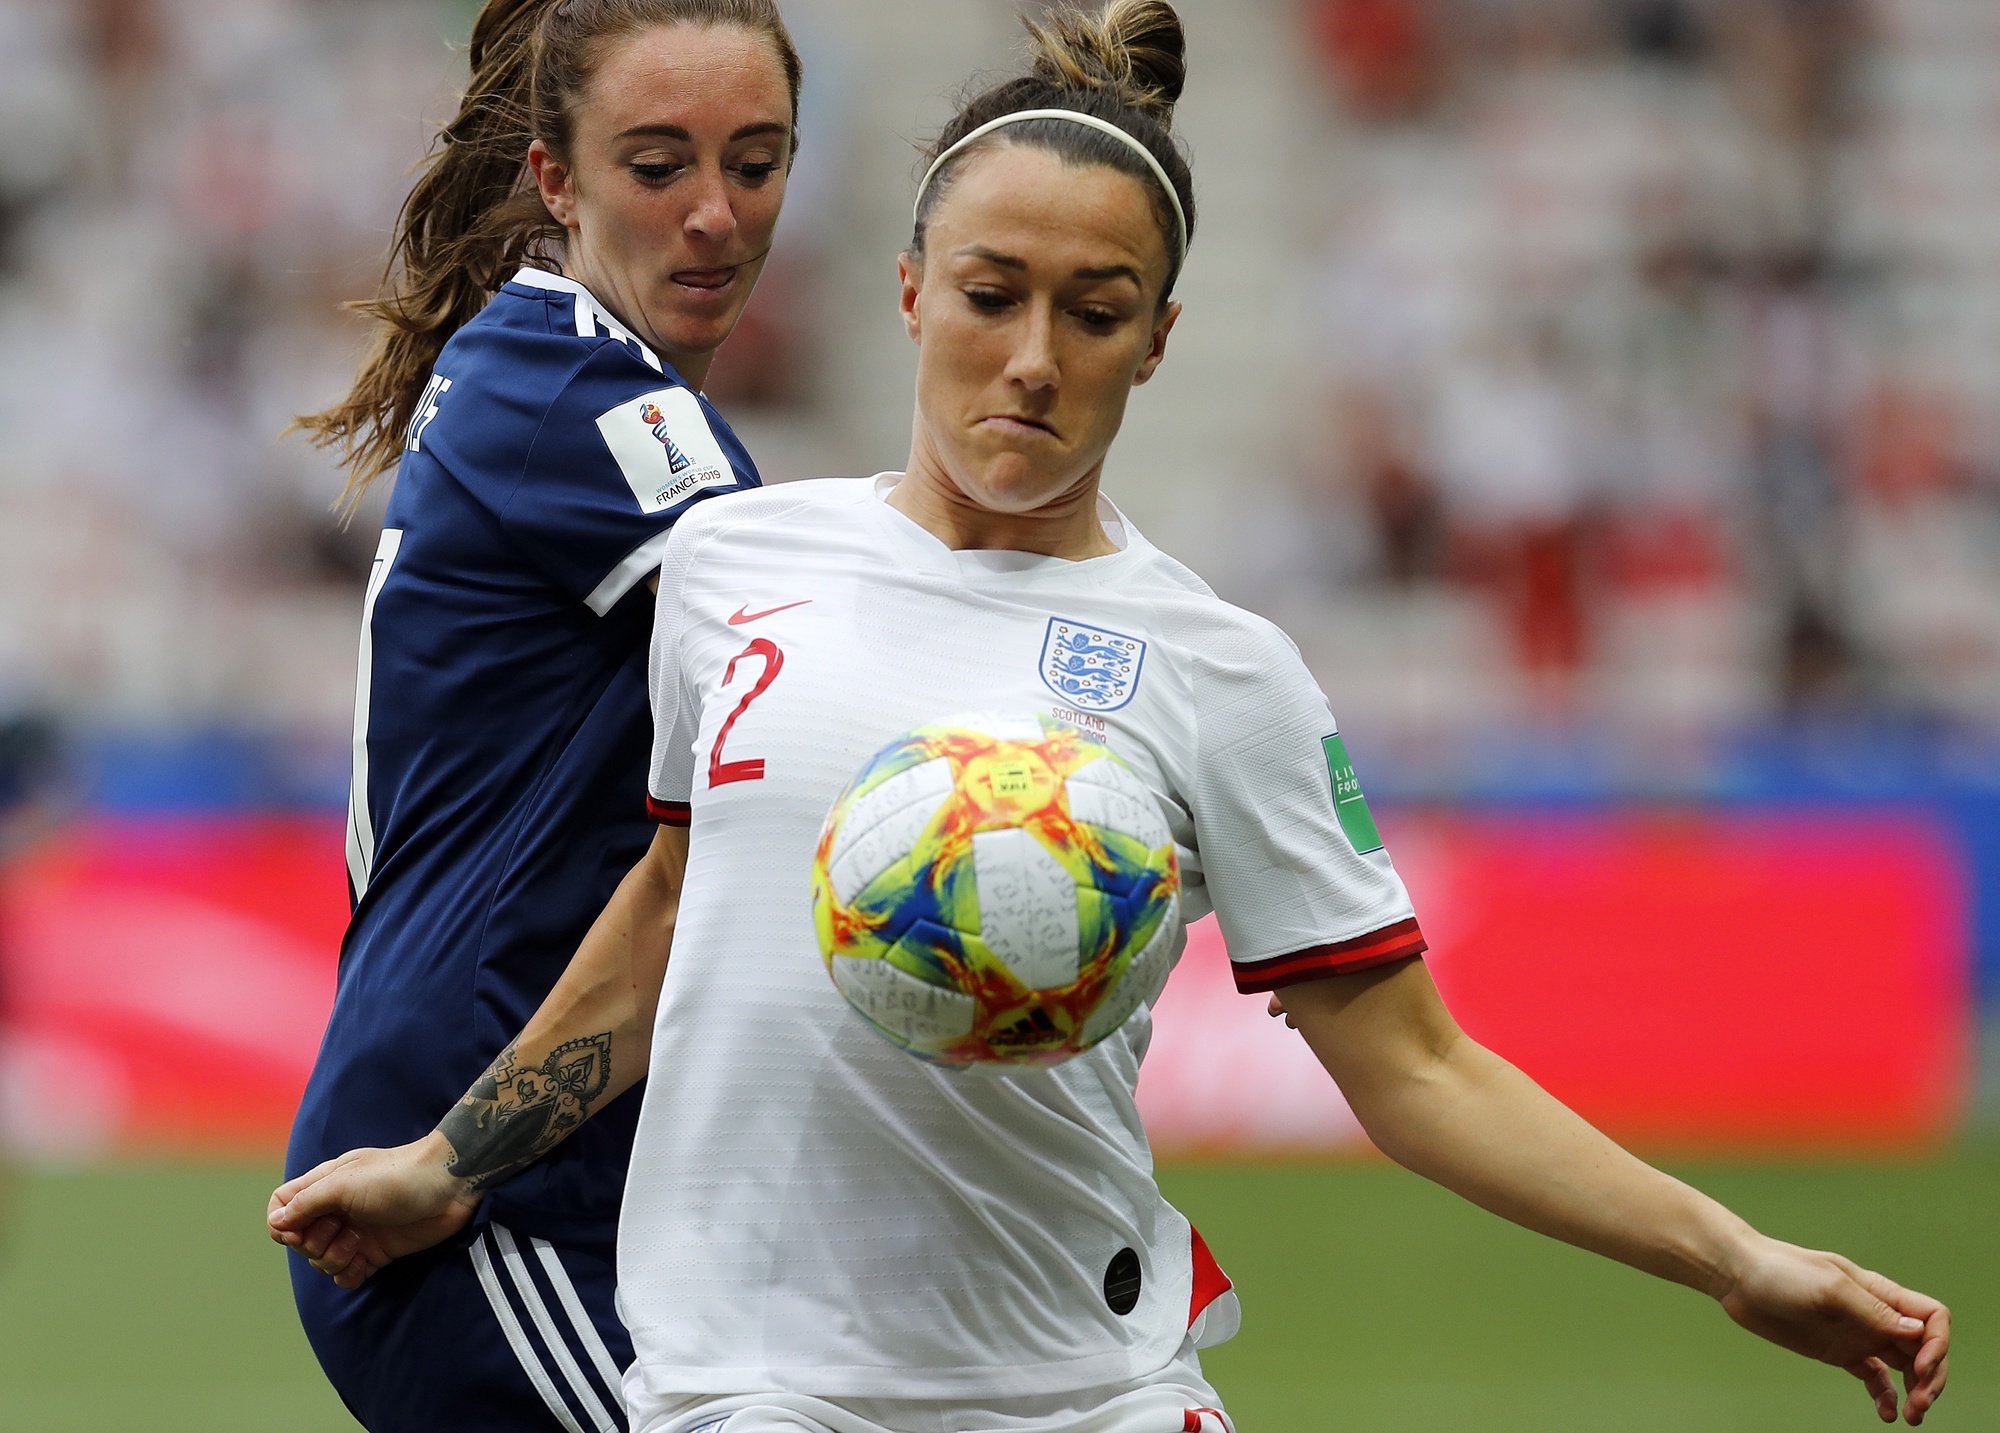 epa08890489 (FILE) - Lucy Bronze (R) of England in action against Lisa Evans (L) of Scotland during the preliminary round match between Scotland vs England at the FIFA Women&#039;s World Cup 2019 in Nice, France, 09 June 2019 (reissued 17 December 2020). Manchester City player Lucy Bronze wins Best FIFA Women&#039;s Player Award during the Best FIFA Football Awards virtual TV show broadcast from the FIFA headquarters in Zurich on 17 December 2020.  EPA/SEBASTIEN NOGIER *** Local Caption *** 55261140